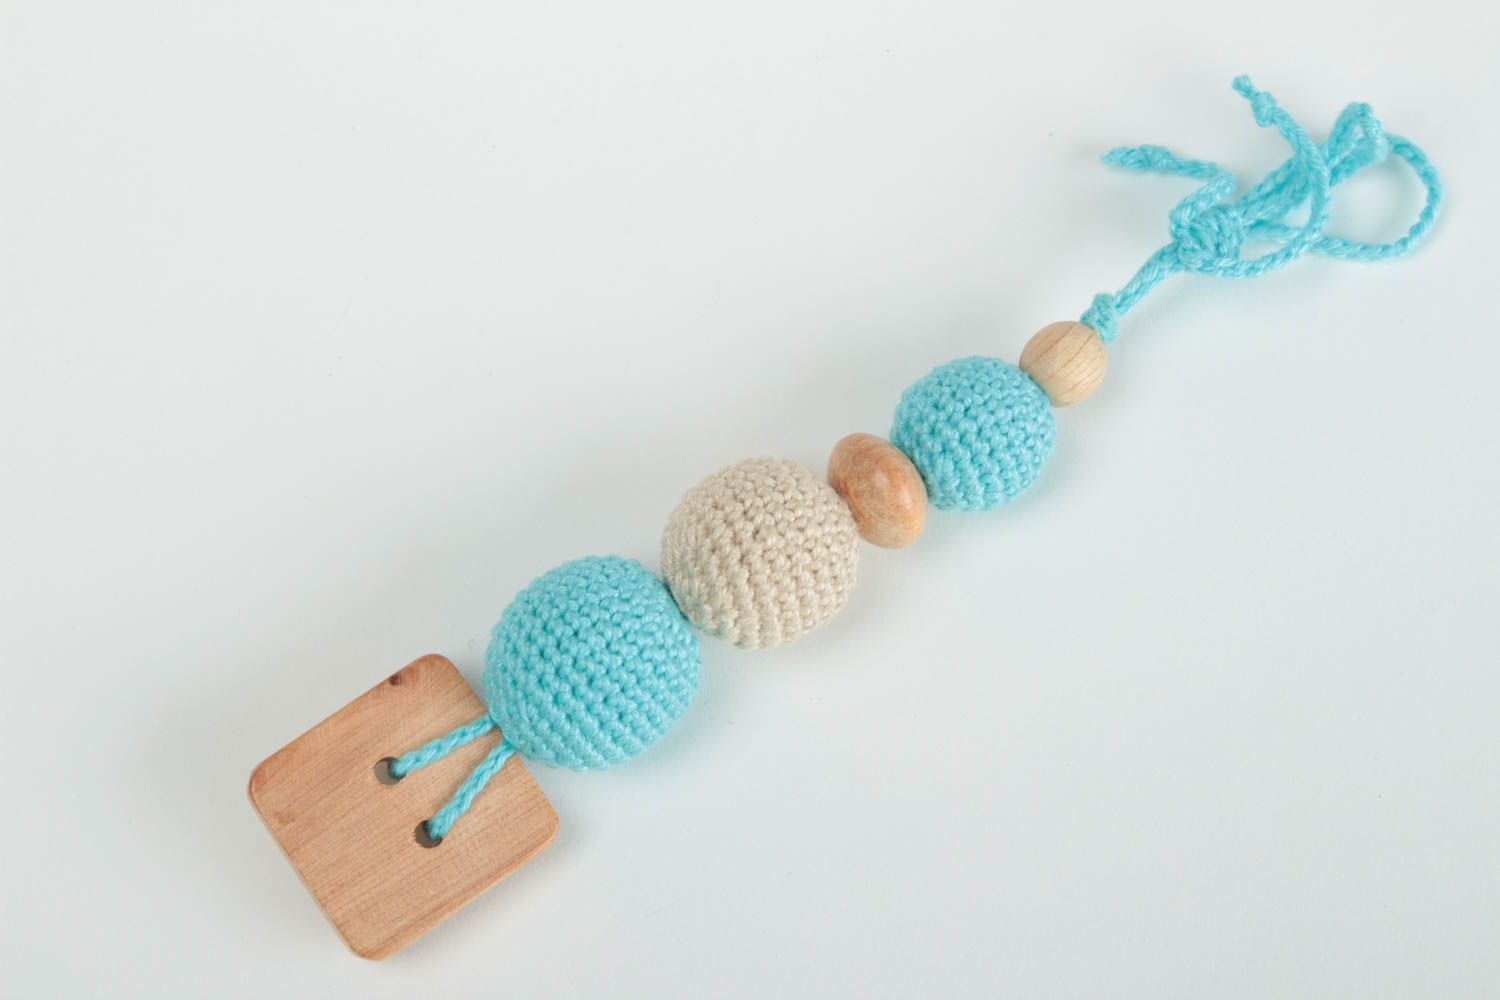 Unusual handmade wooden baby teether toy eco baby accessories and gift ideas  photo 2